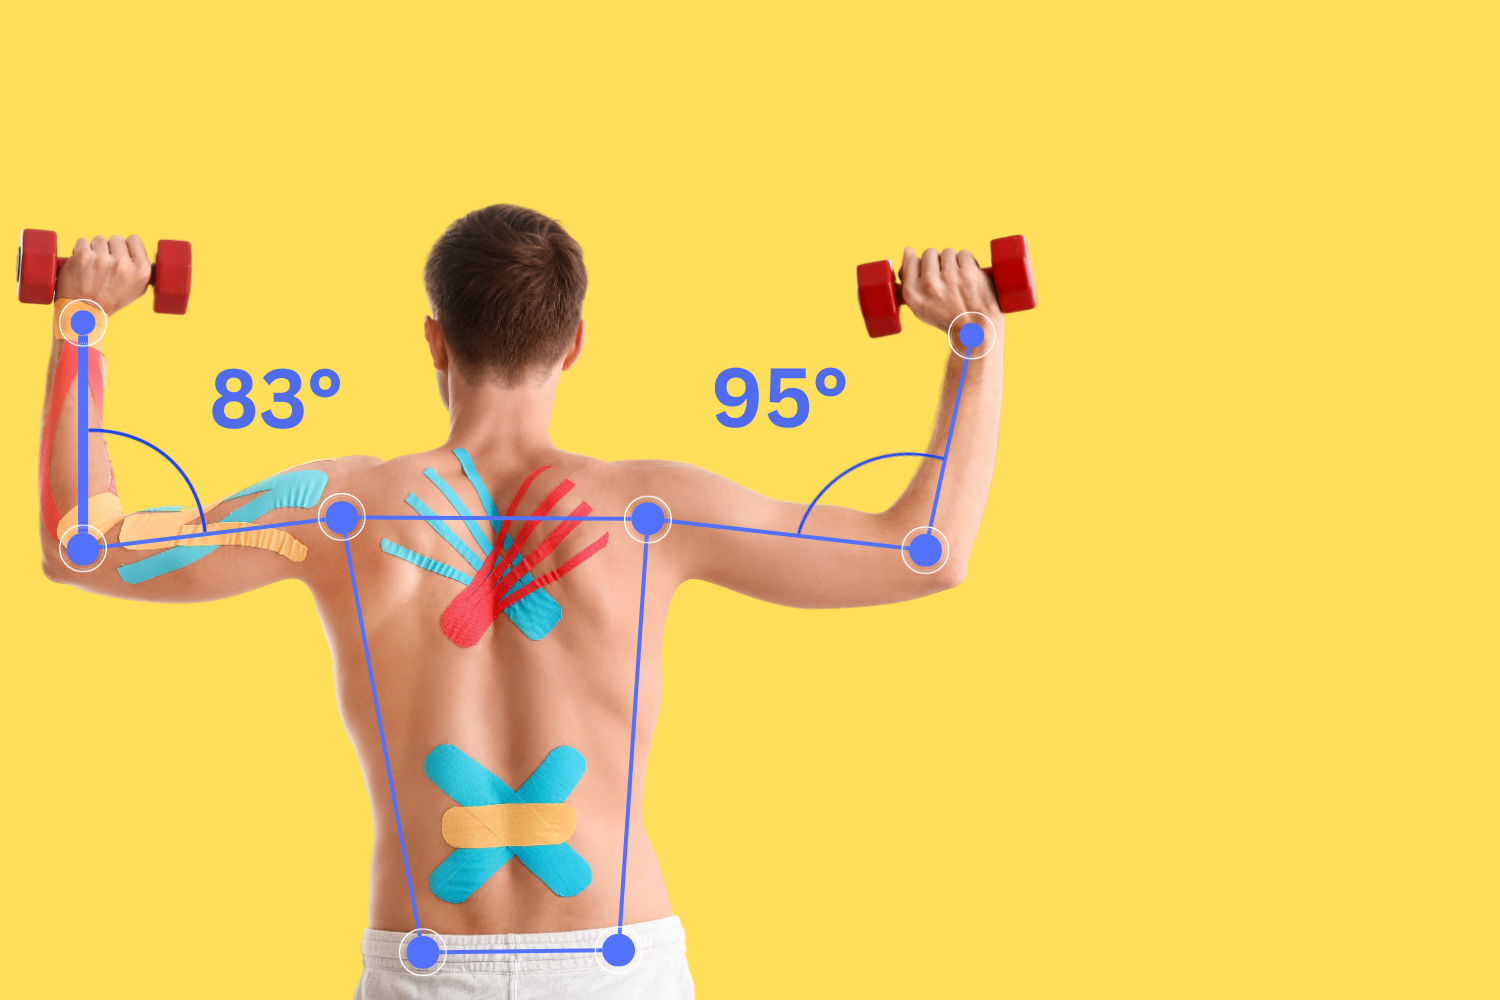 Image shows a man doing physiotherapy exercises, with pose estimation landmarks on his arms and shoulders measuring Range of Motion using AI.